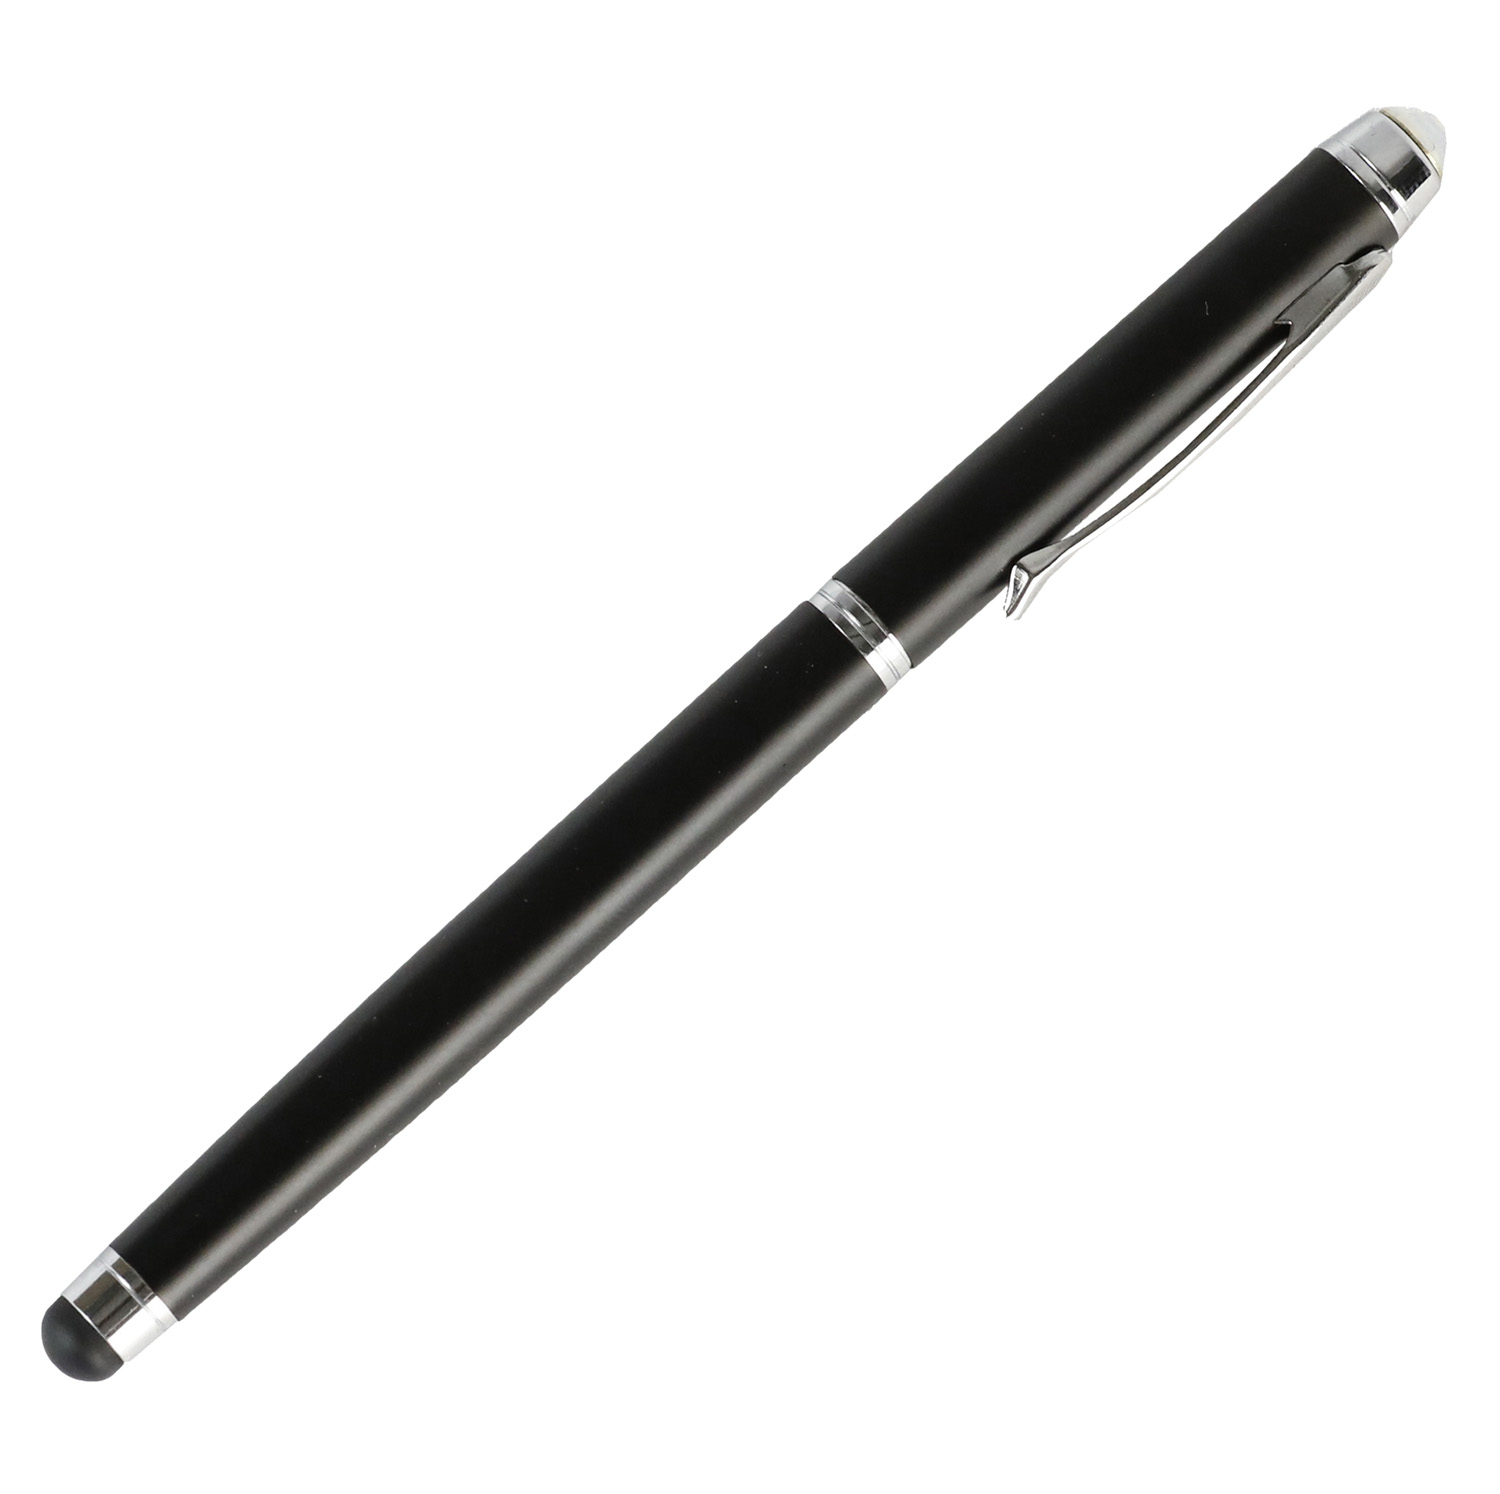 Universal Stylus Pen - Touch Screen with Gem for Iphone Ipad Tablet Smartphones - Pearl